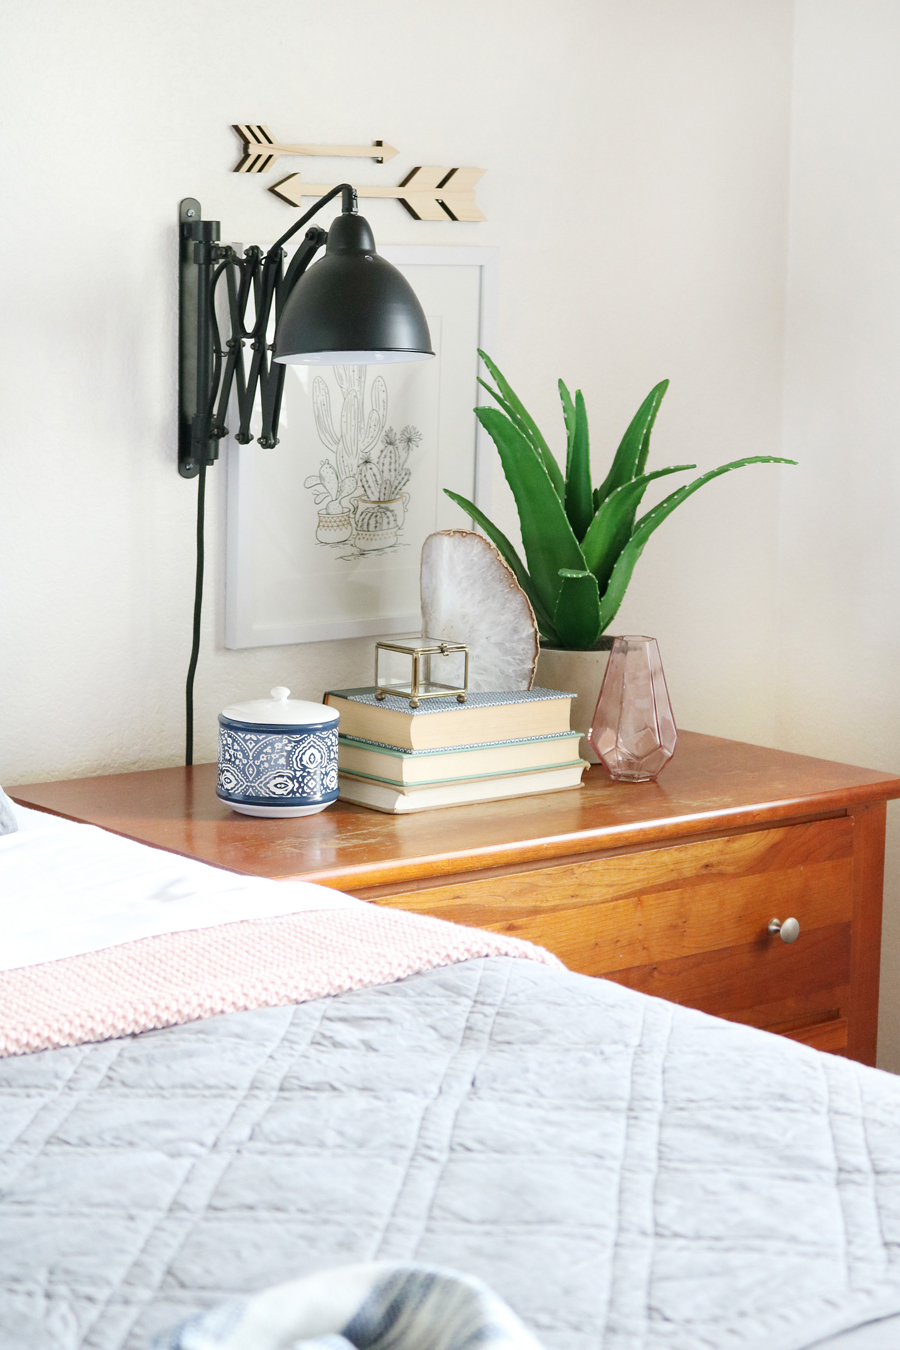 Easy Bedroom Refresh - Neutral basics mixed with soft touches of pinks and southwest decor pieces.